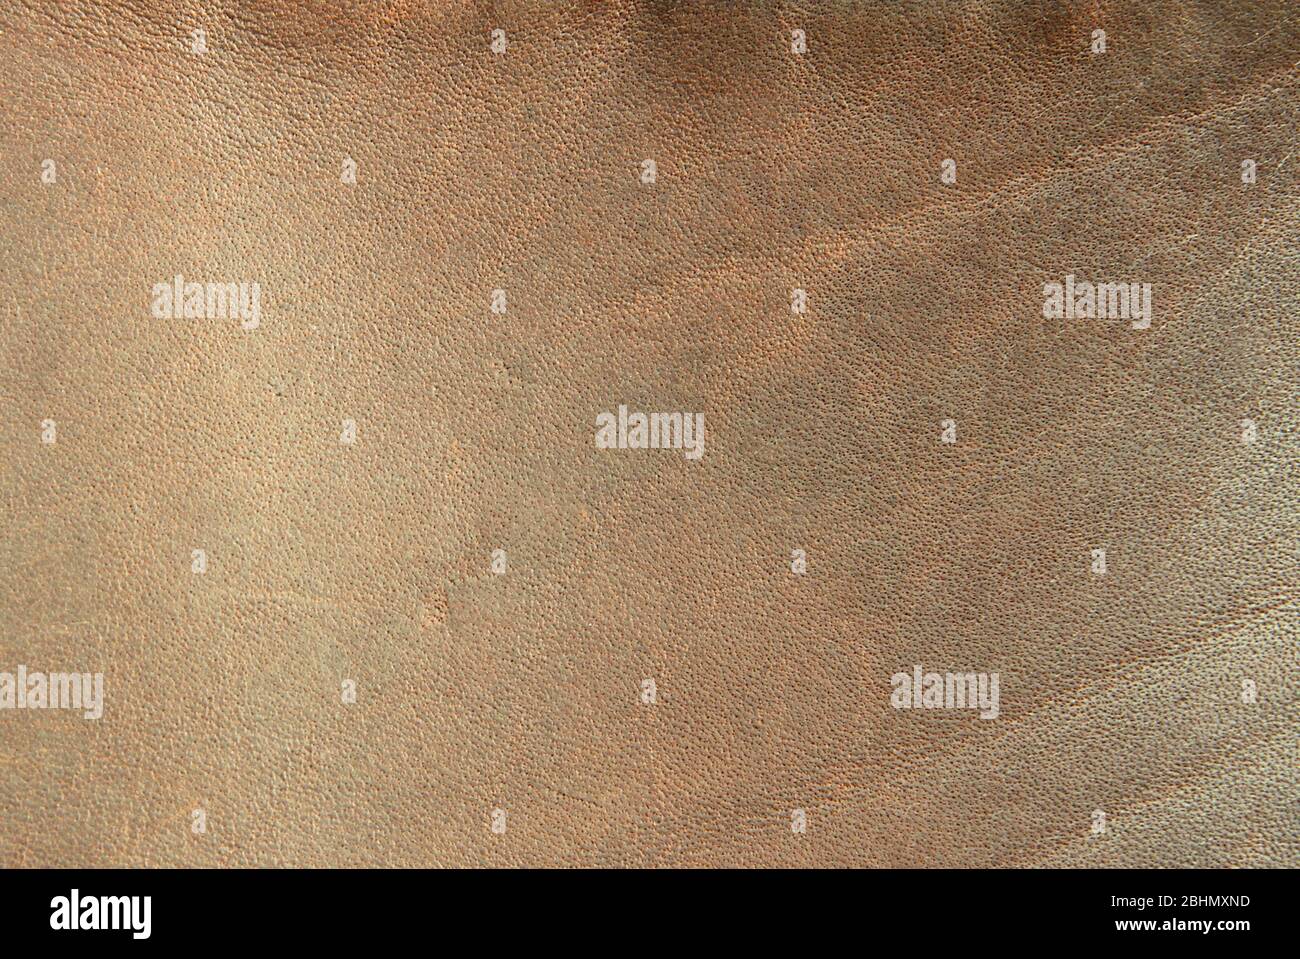 Brown genuine leather texture closeup. Background for text design. Stock Photo